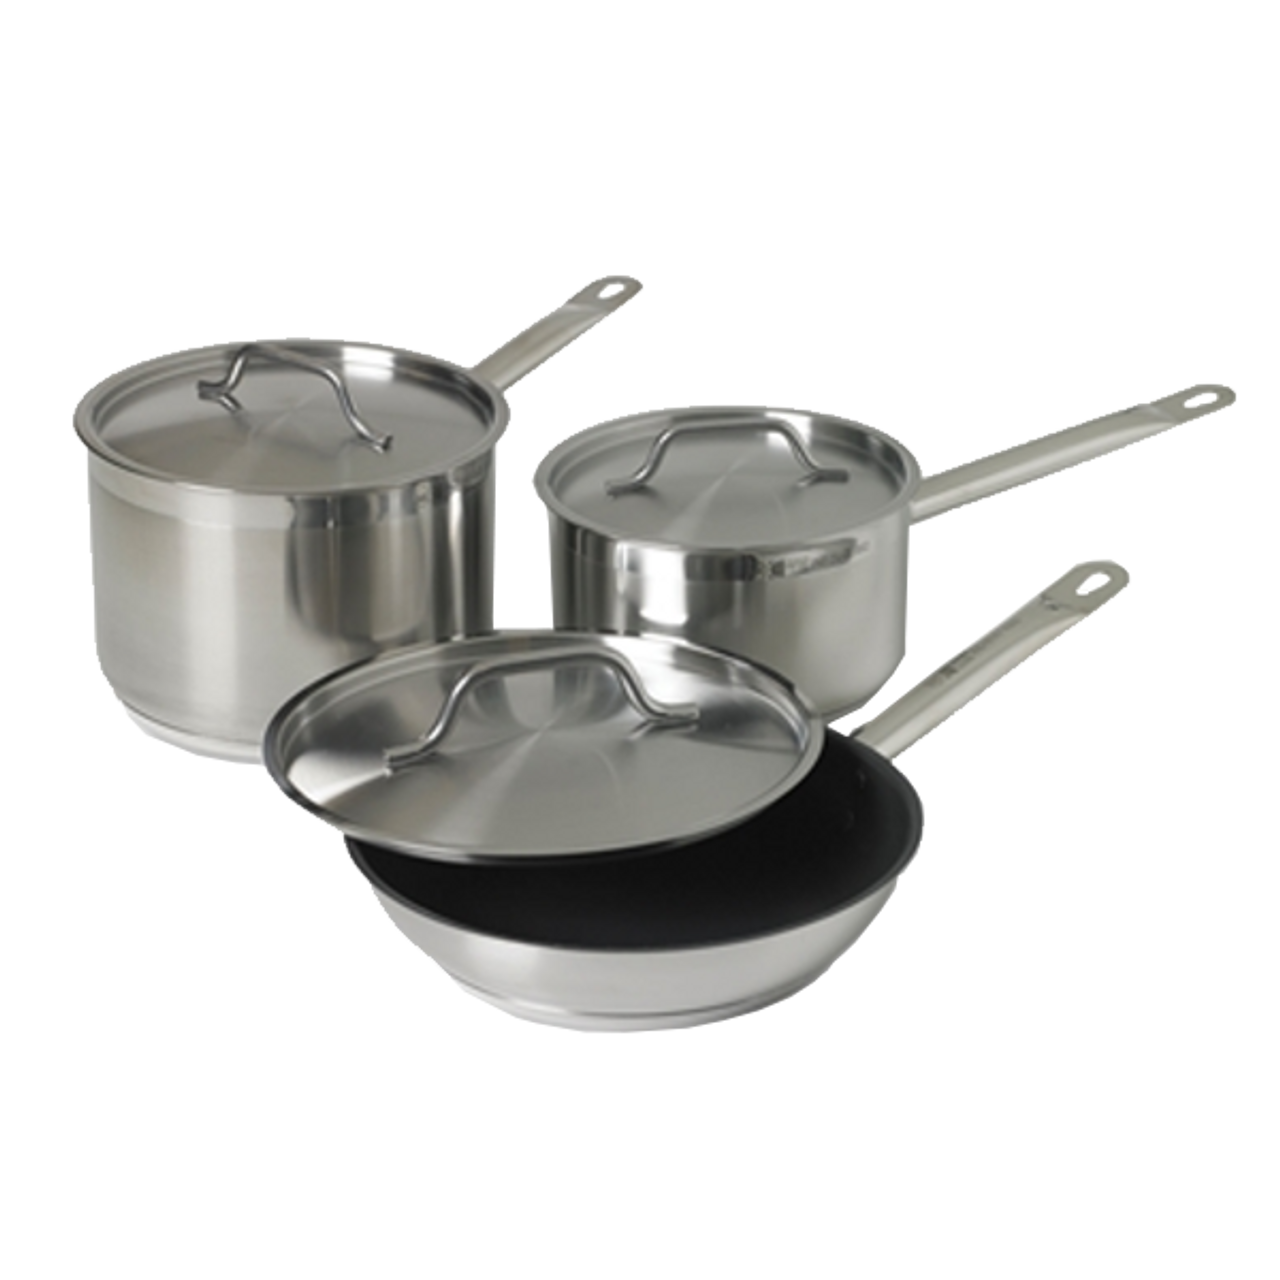 Optio™ Deluxe Cookware Set, (6) piece, includes: (1) each of 3802, 3907C, 3803, 3908C, N3809 & 3910C, induction ready, stainless steel, NSF